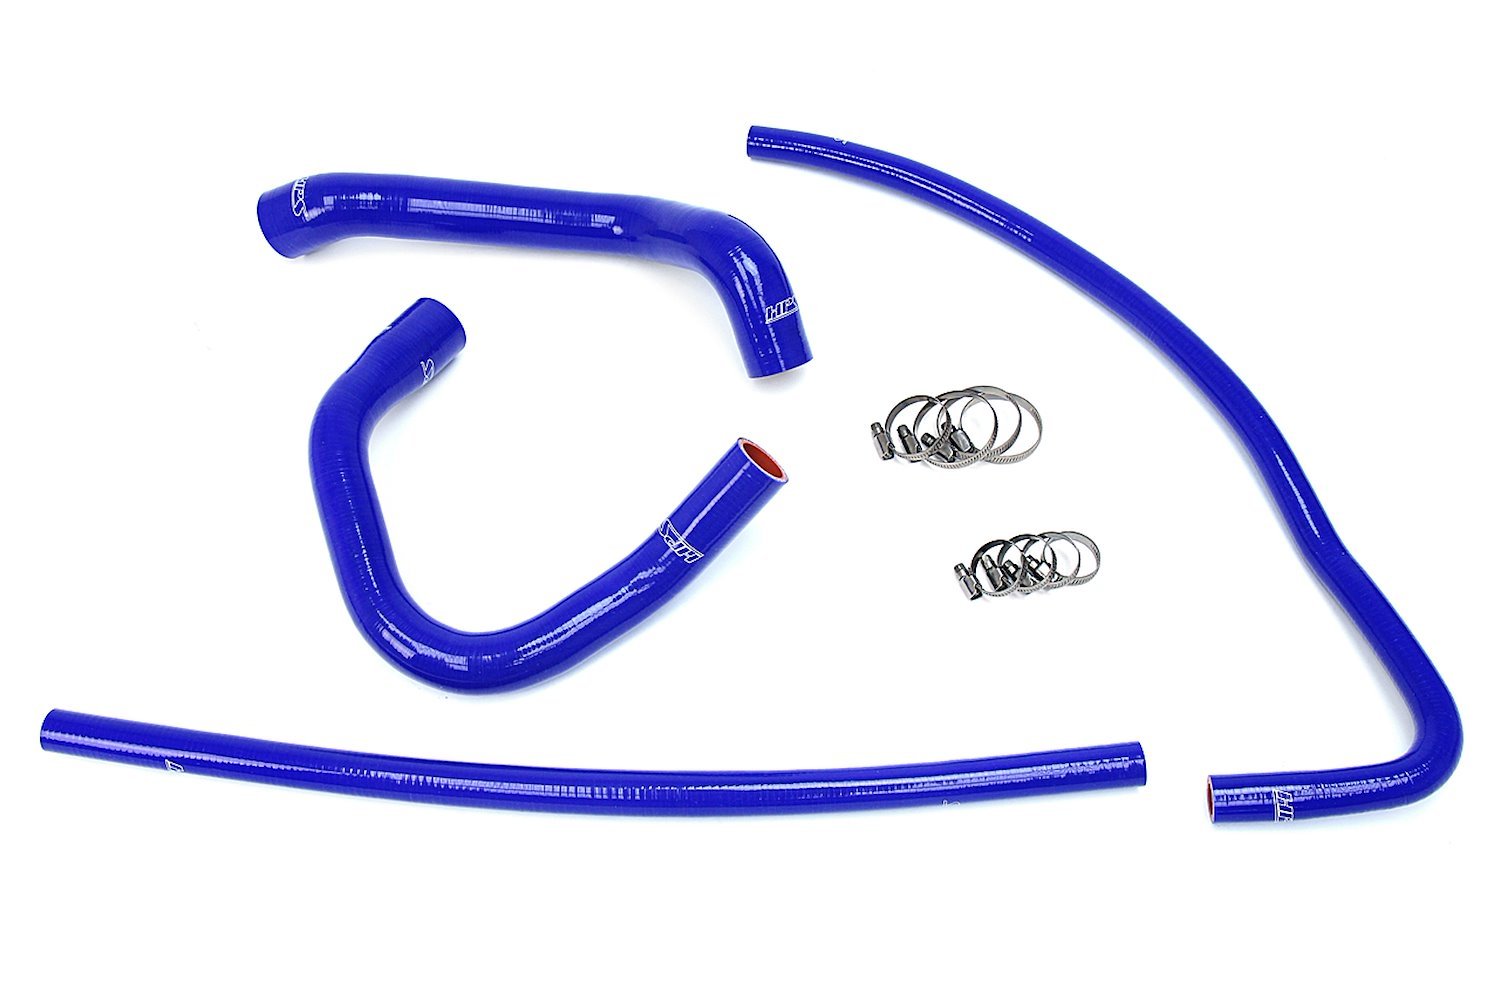 57-1690-BLUE Coolant Hose Kit, High-Temp 3-Ply Reinforced Silicone, Replace Rubber Radiator Heater Coolant Hoses